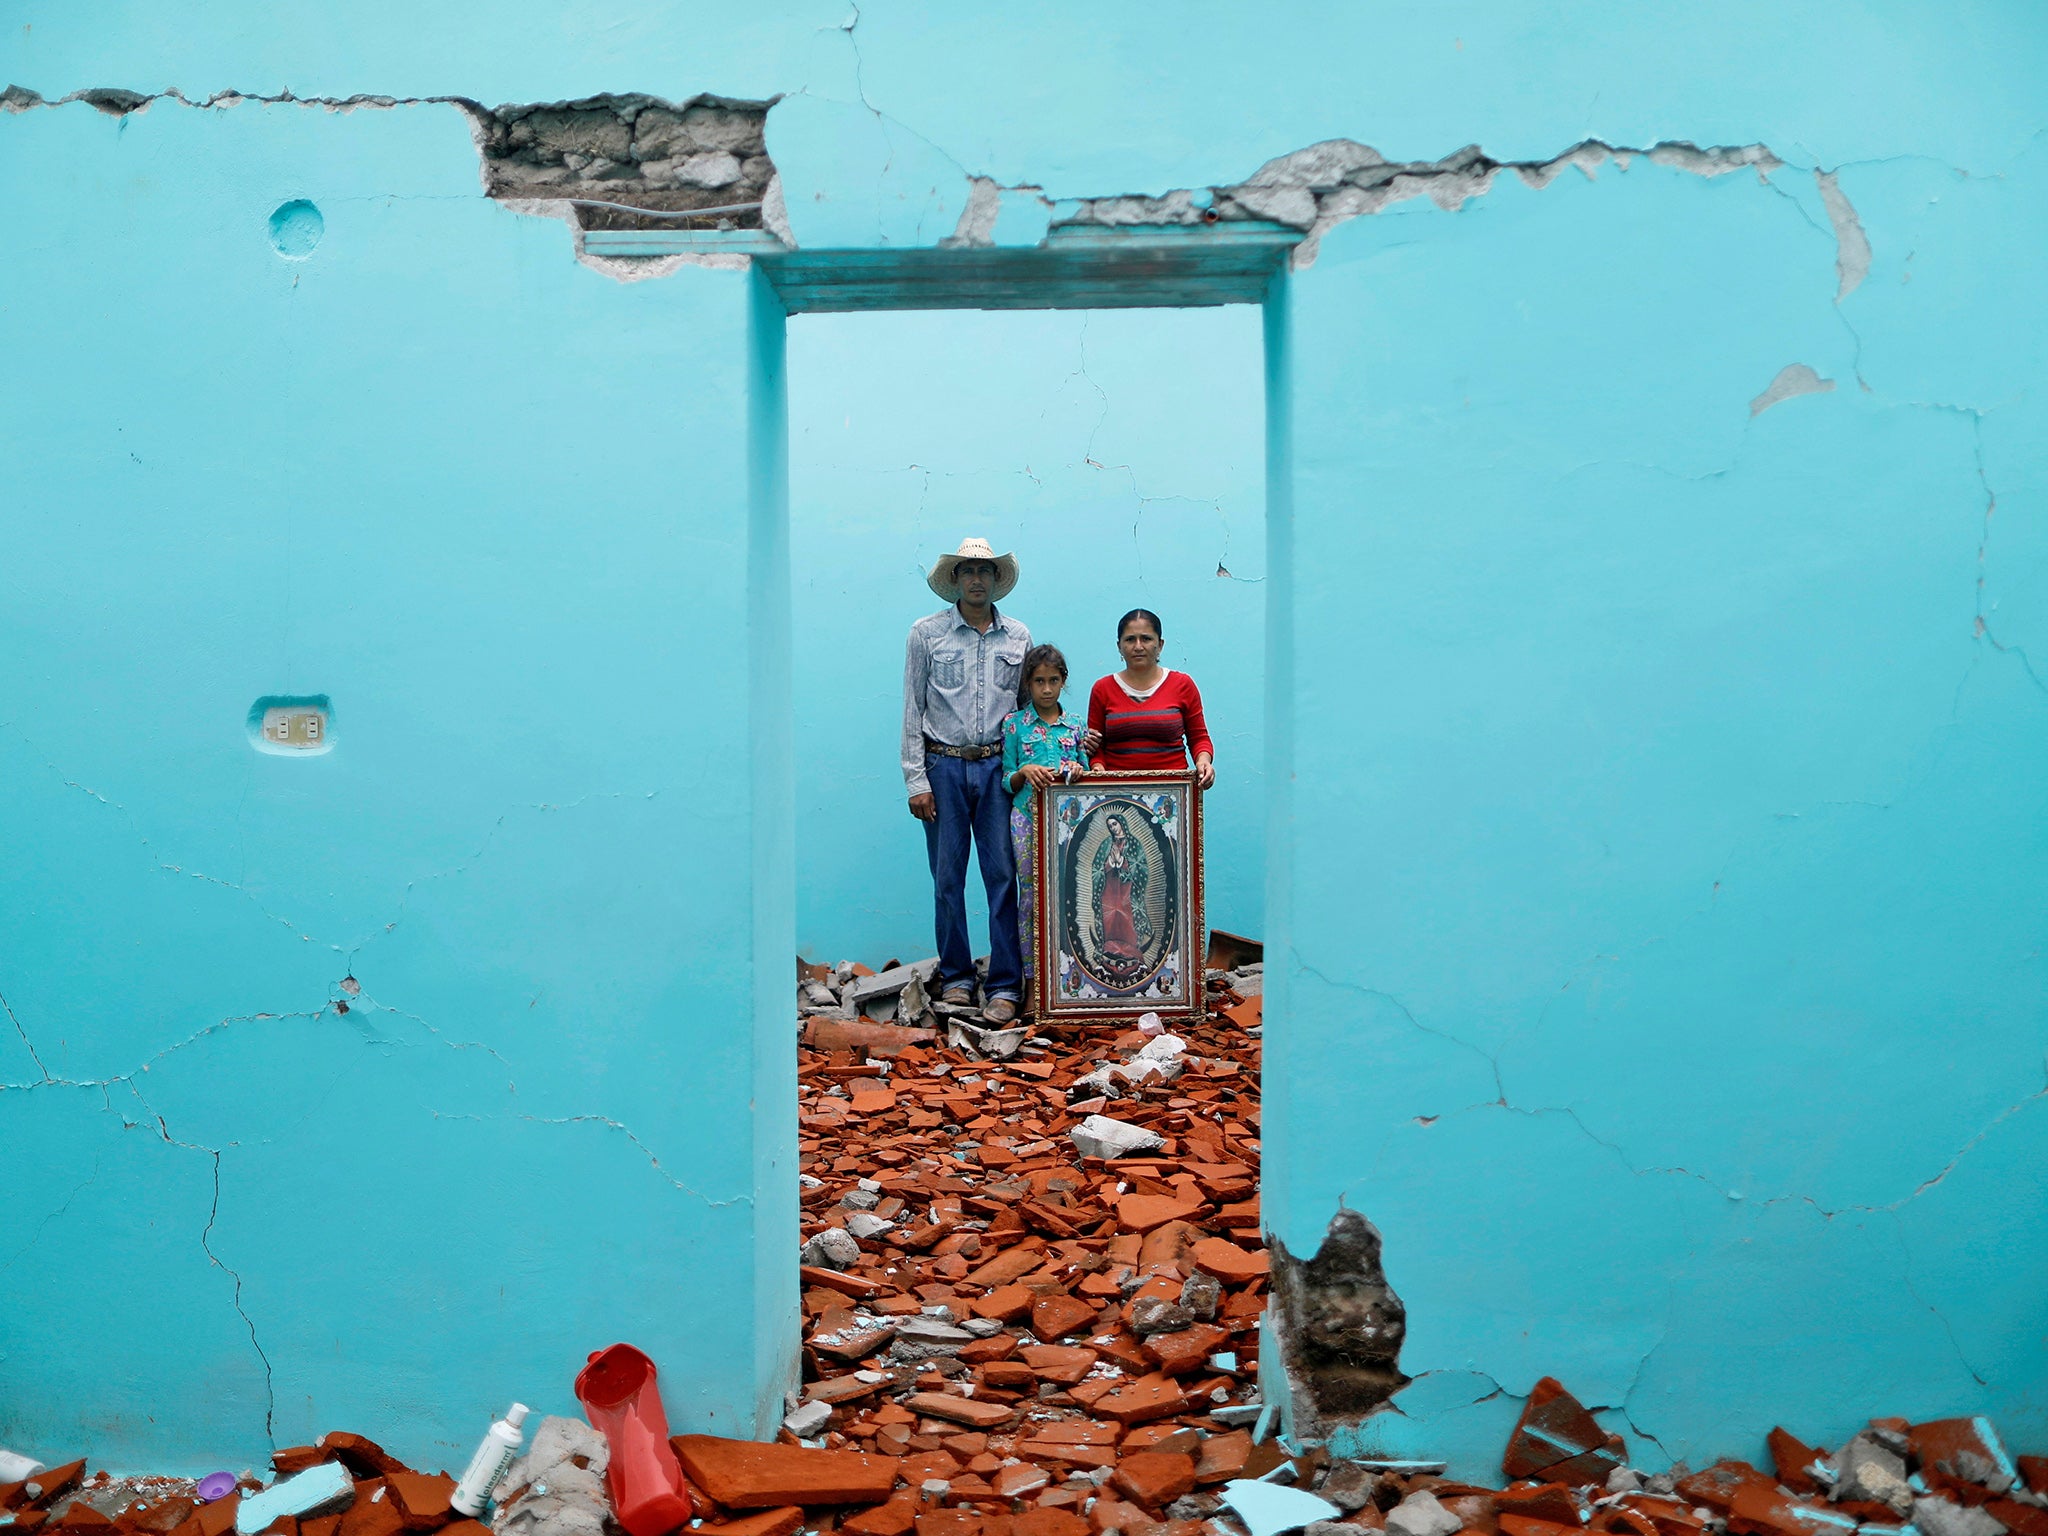 Luis Medina, Maria Teresa Espinoza, and Maria de Jesus Medina inside their house which was badly damaged. They are living in their backyard as they wait for their home to be demolished and rebuilt.